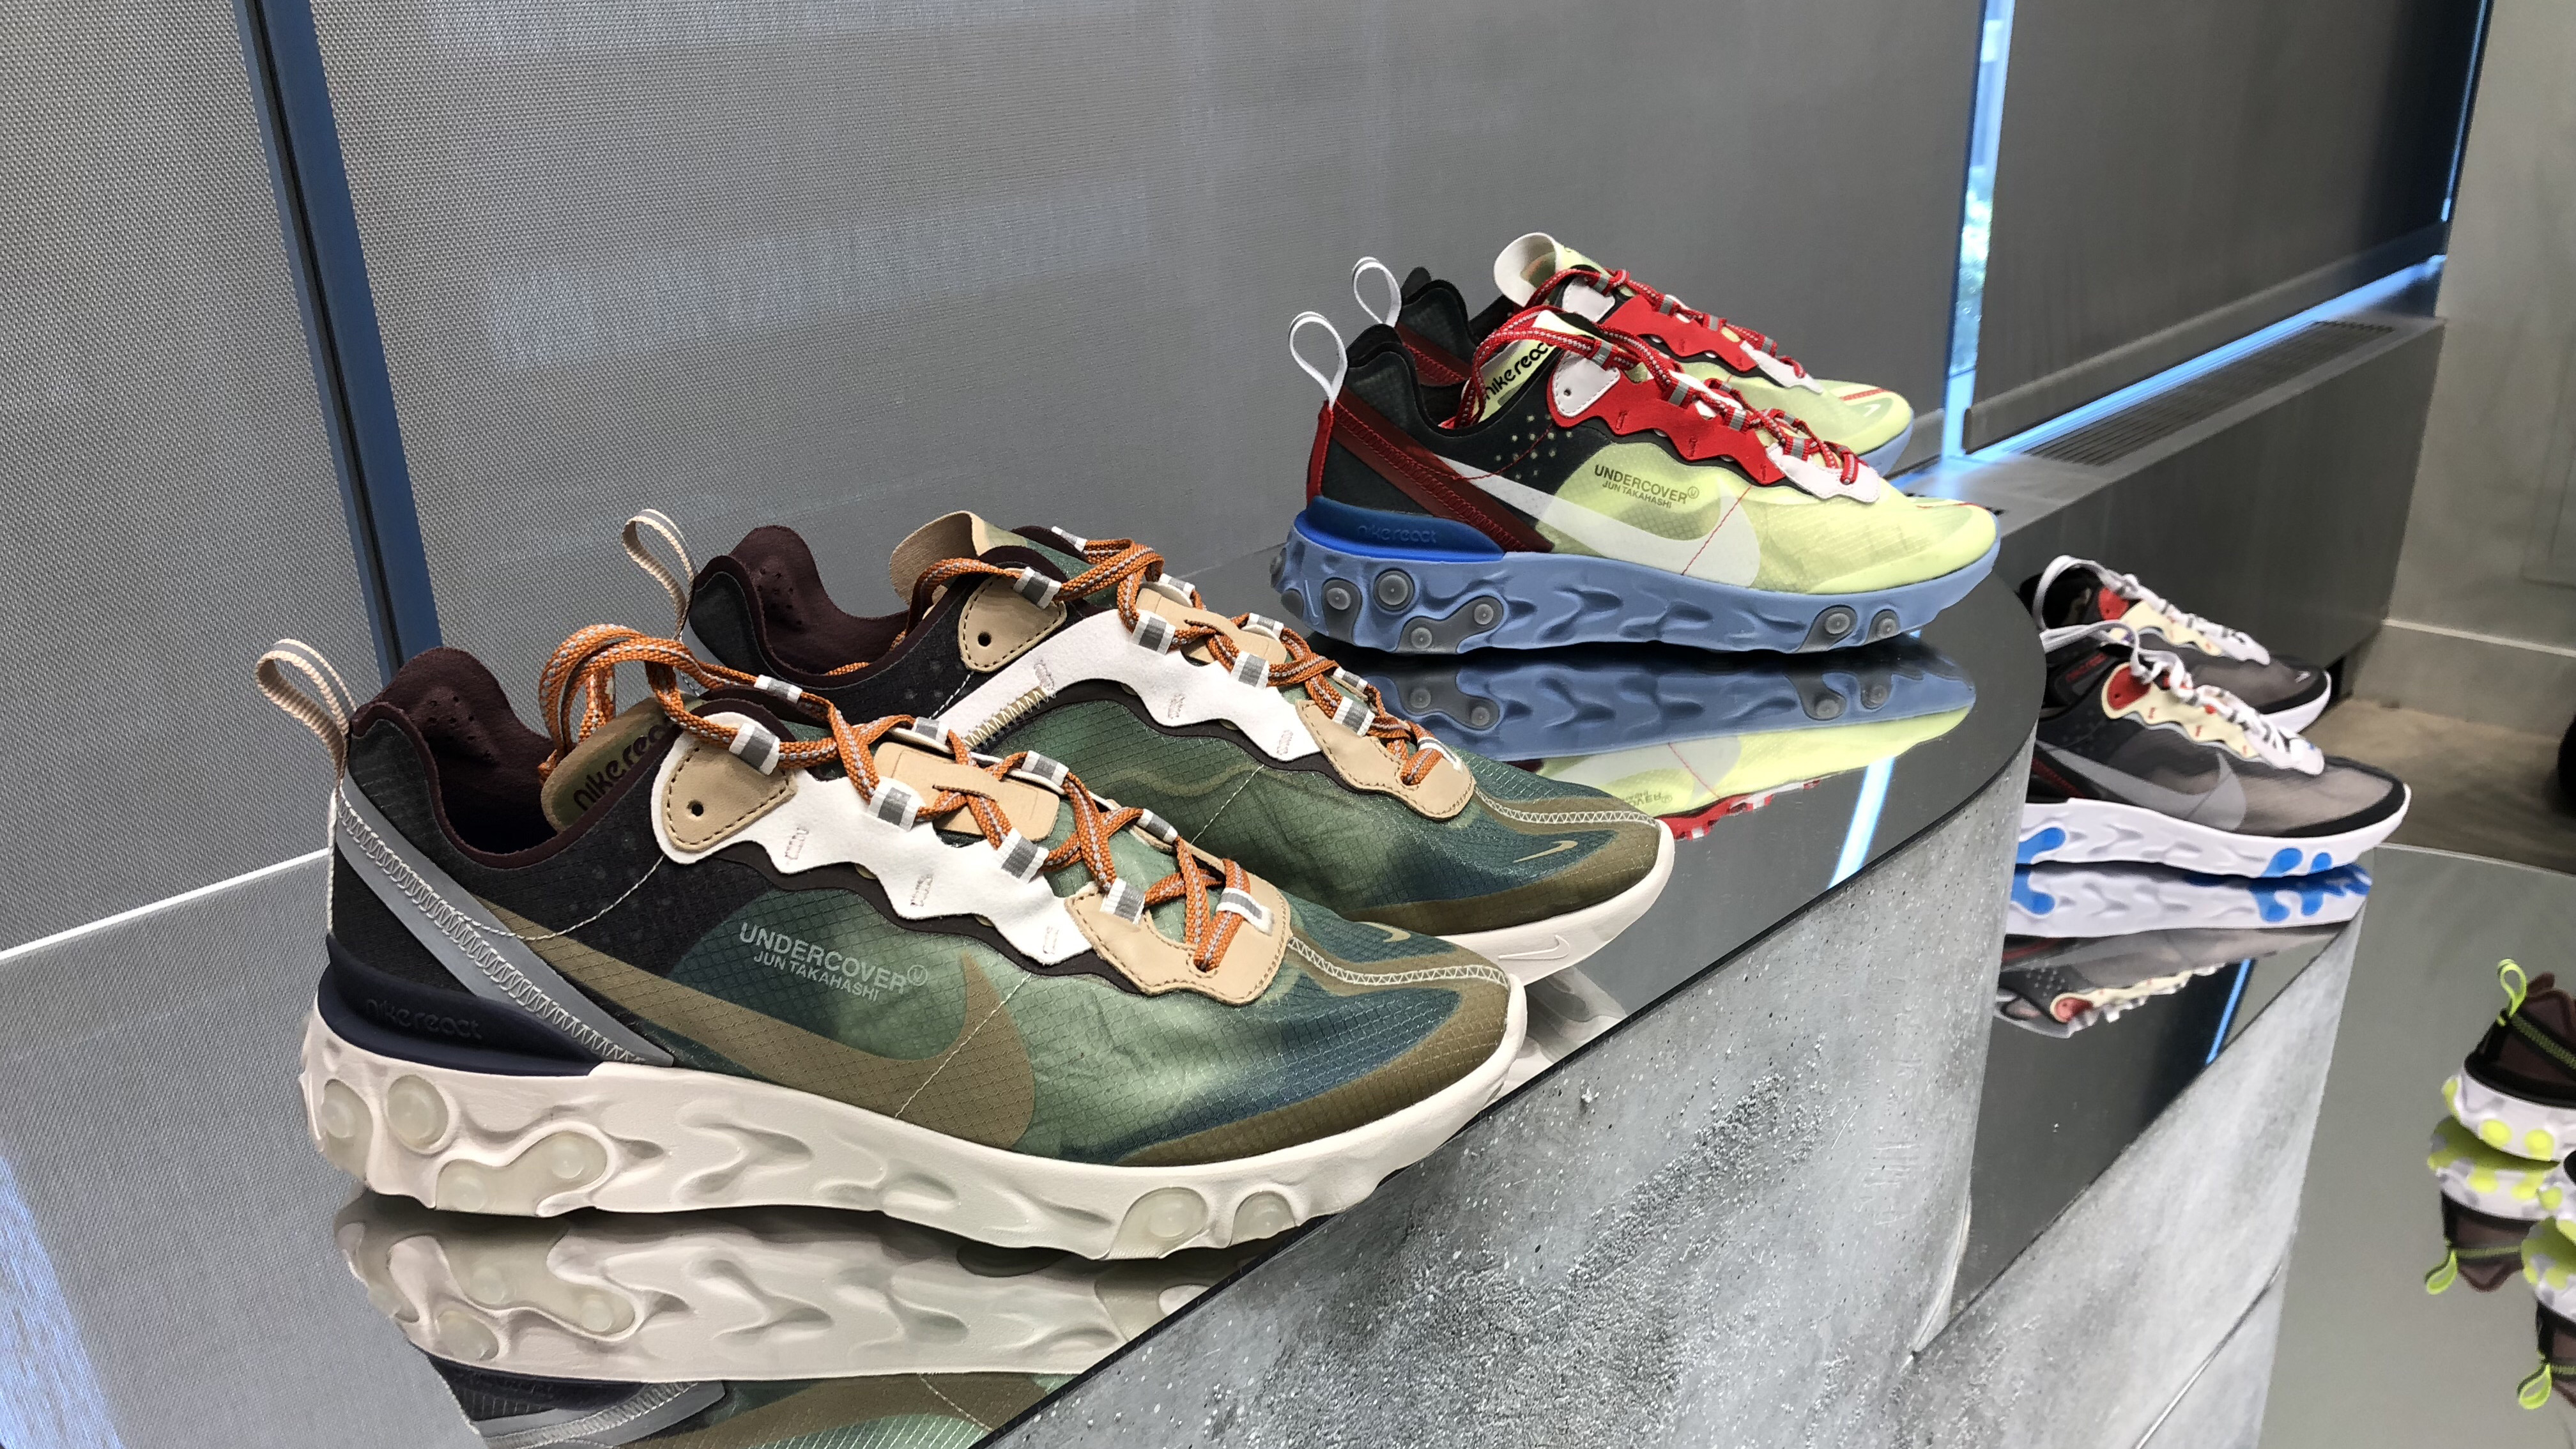 HOT爆買い NIKE - react element 87 undercover 26.5cm nikeの通販 by ...